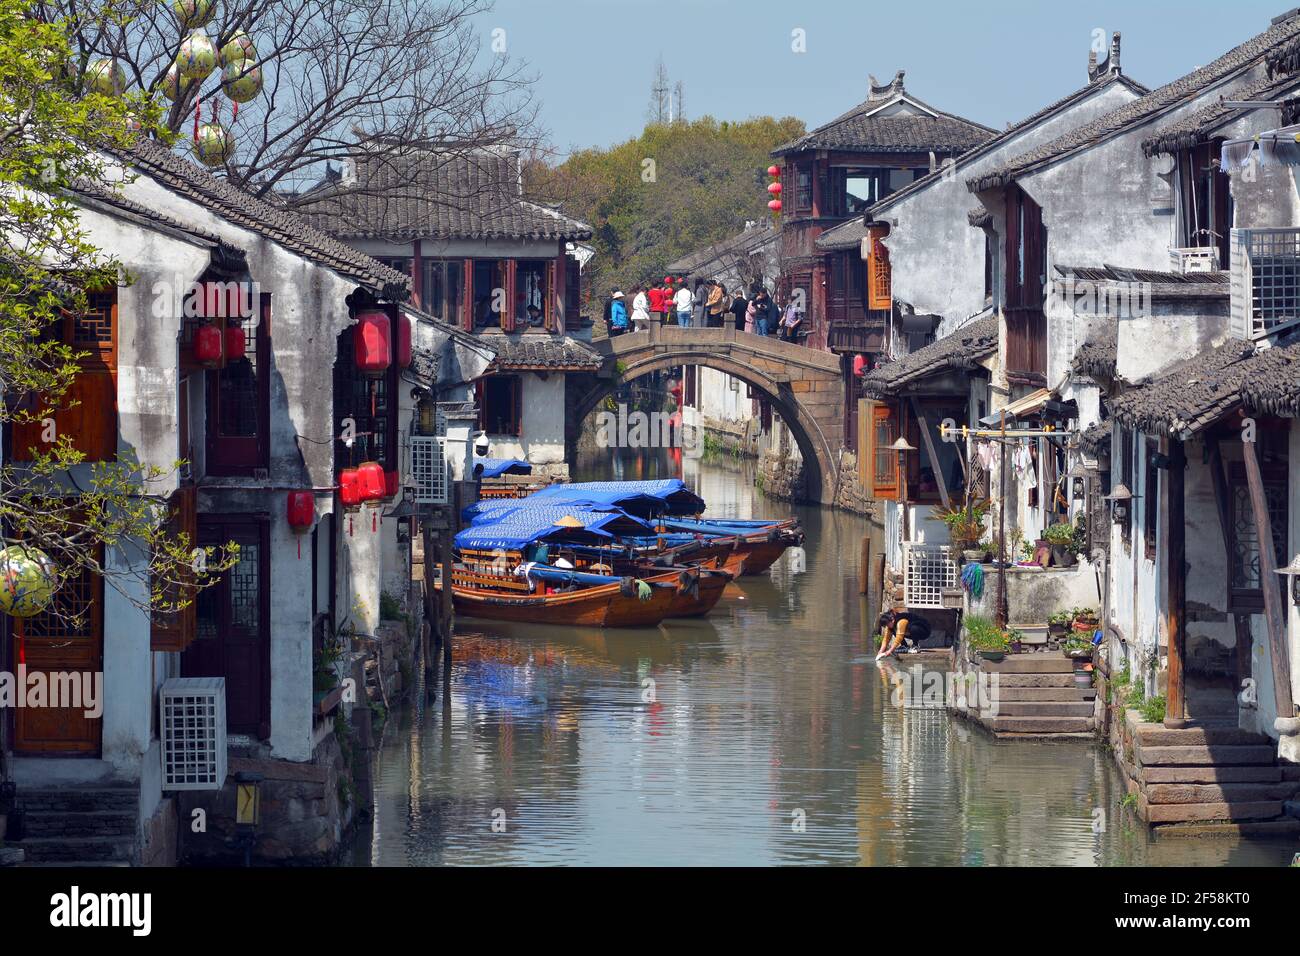 Zhouzhuang scenic area in Jiangsu,China. Tourists take photos on a stone bridge while locals do their washing in the canal. Stock Photo